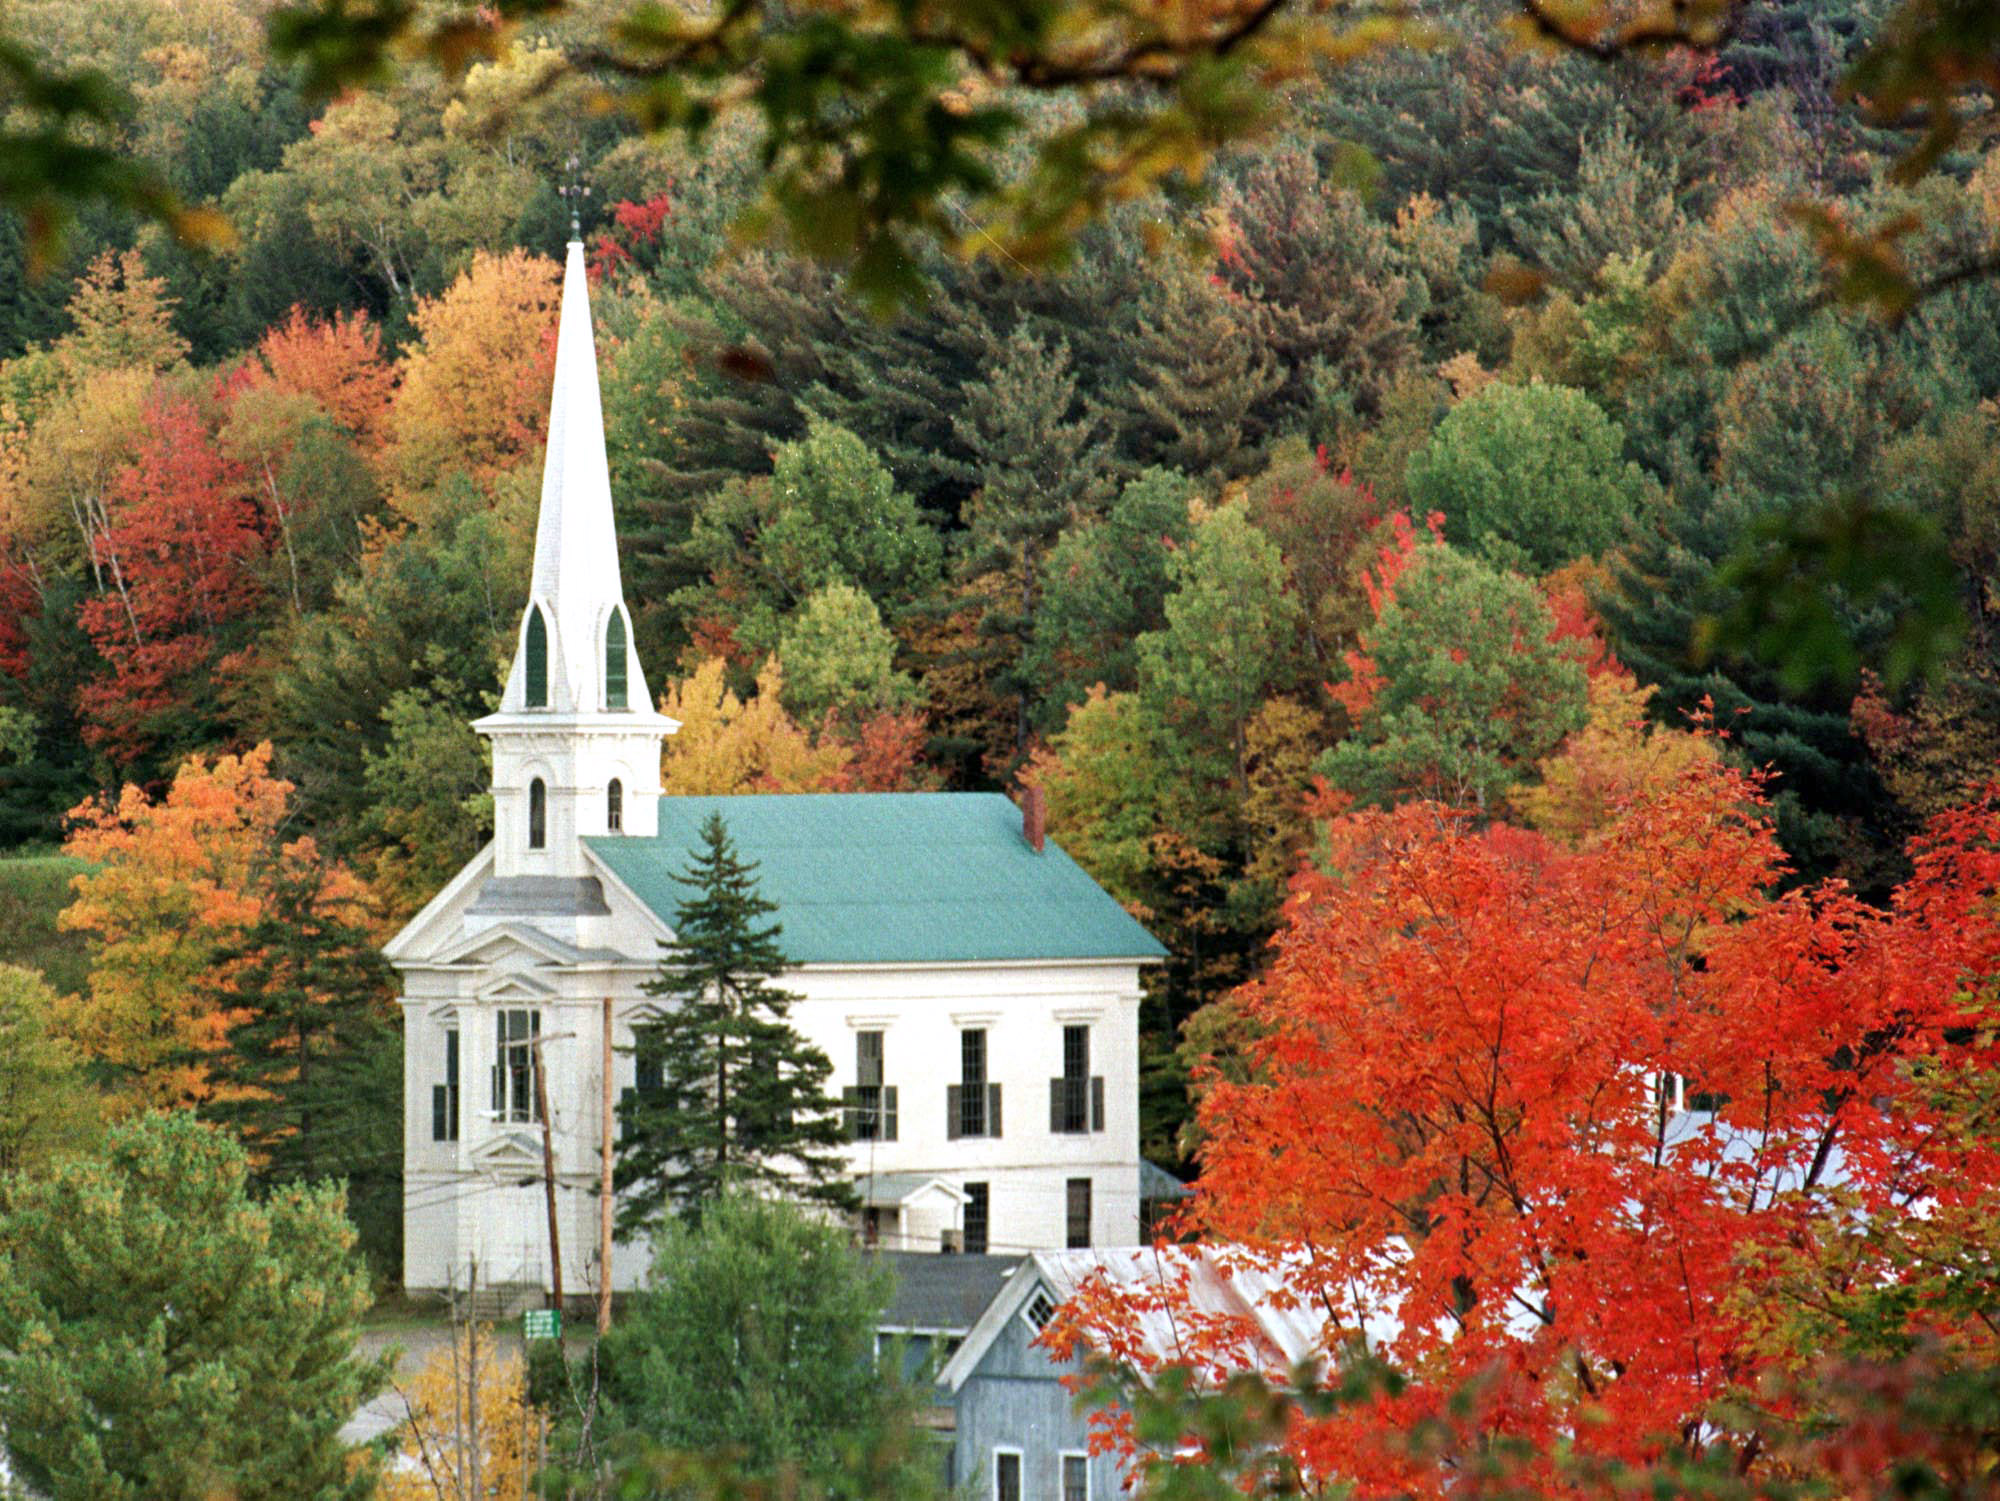 Colors of fall seen on trees frame a church